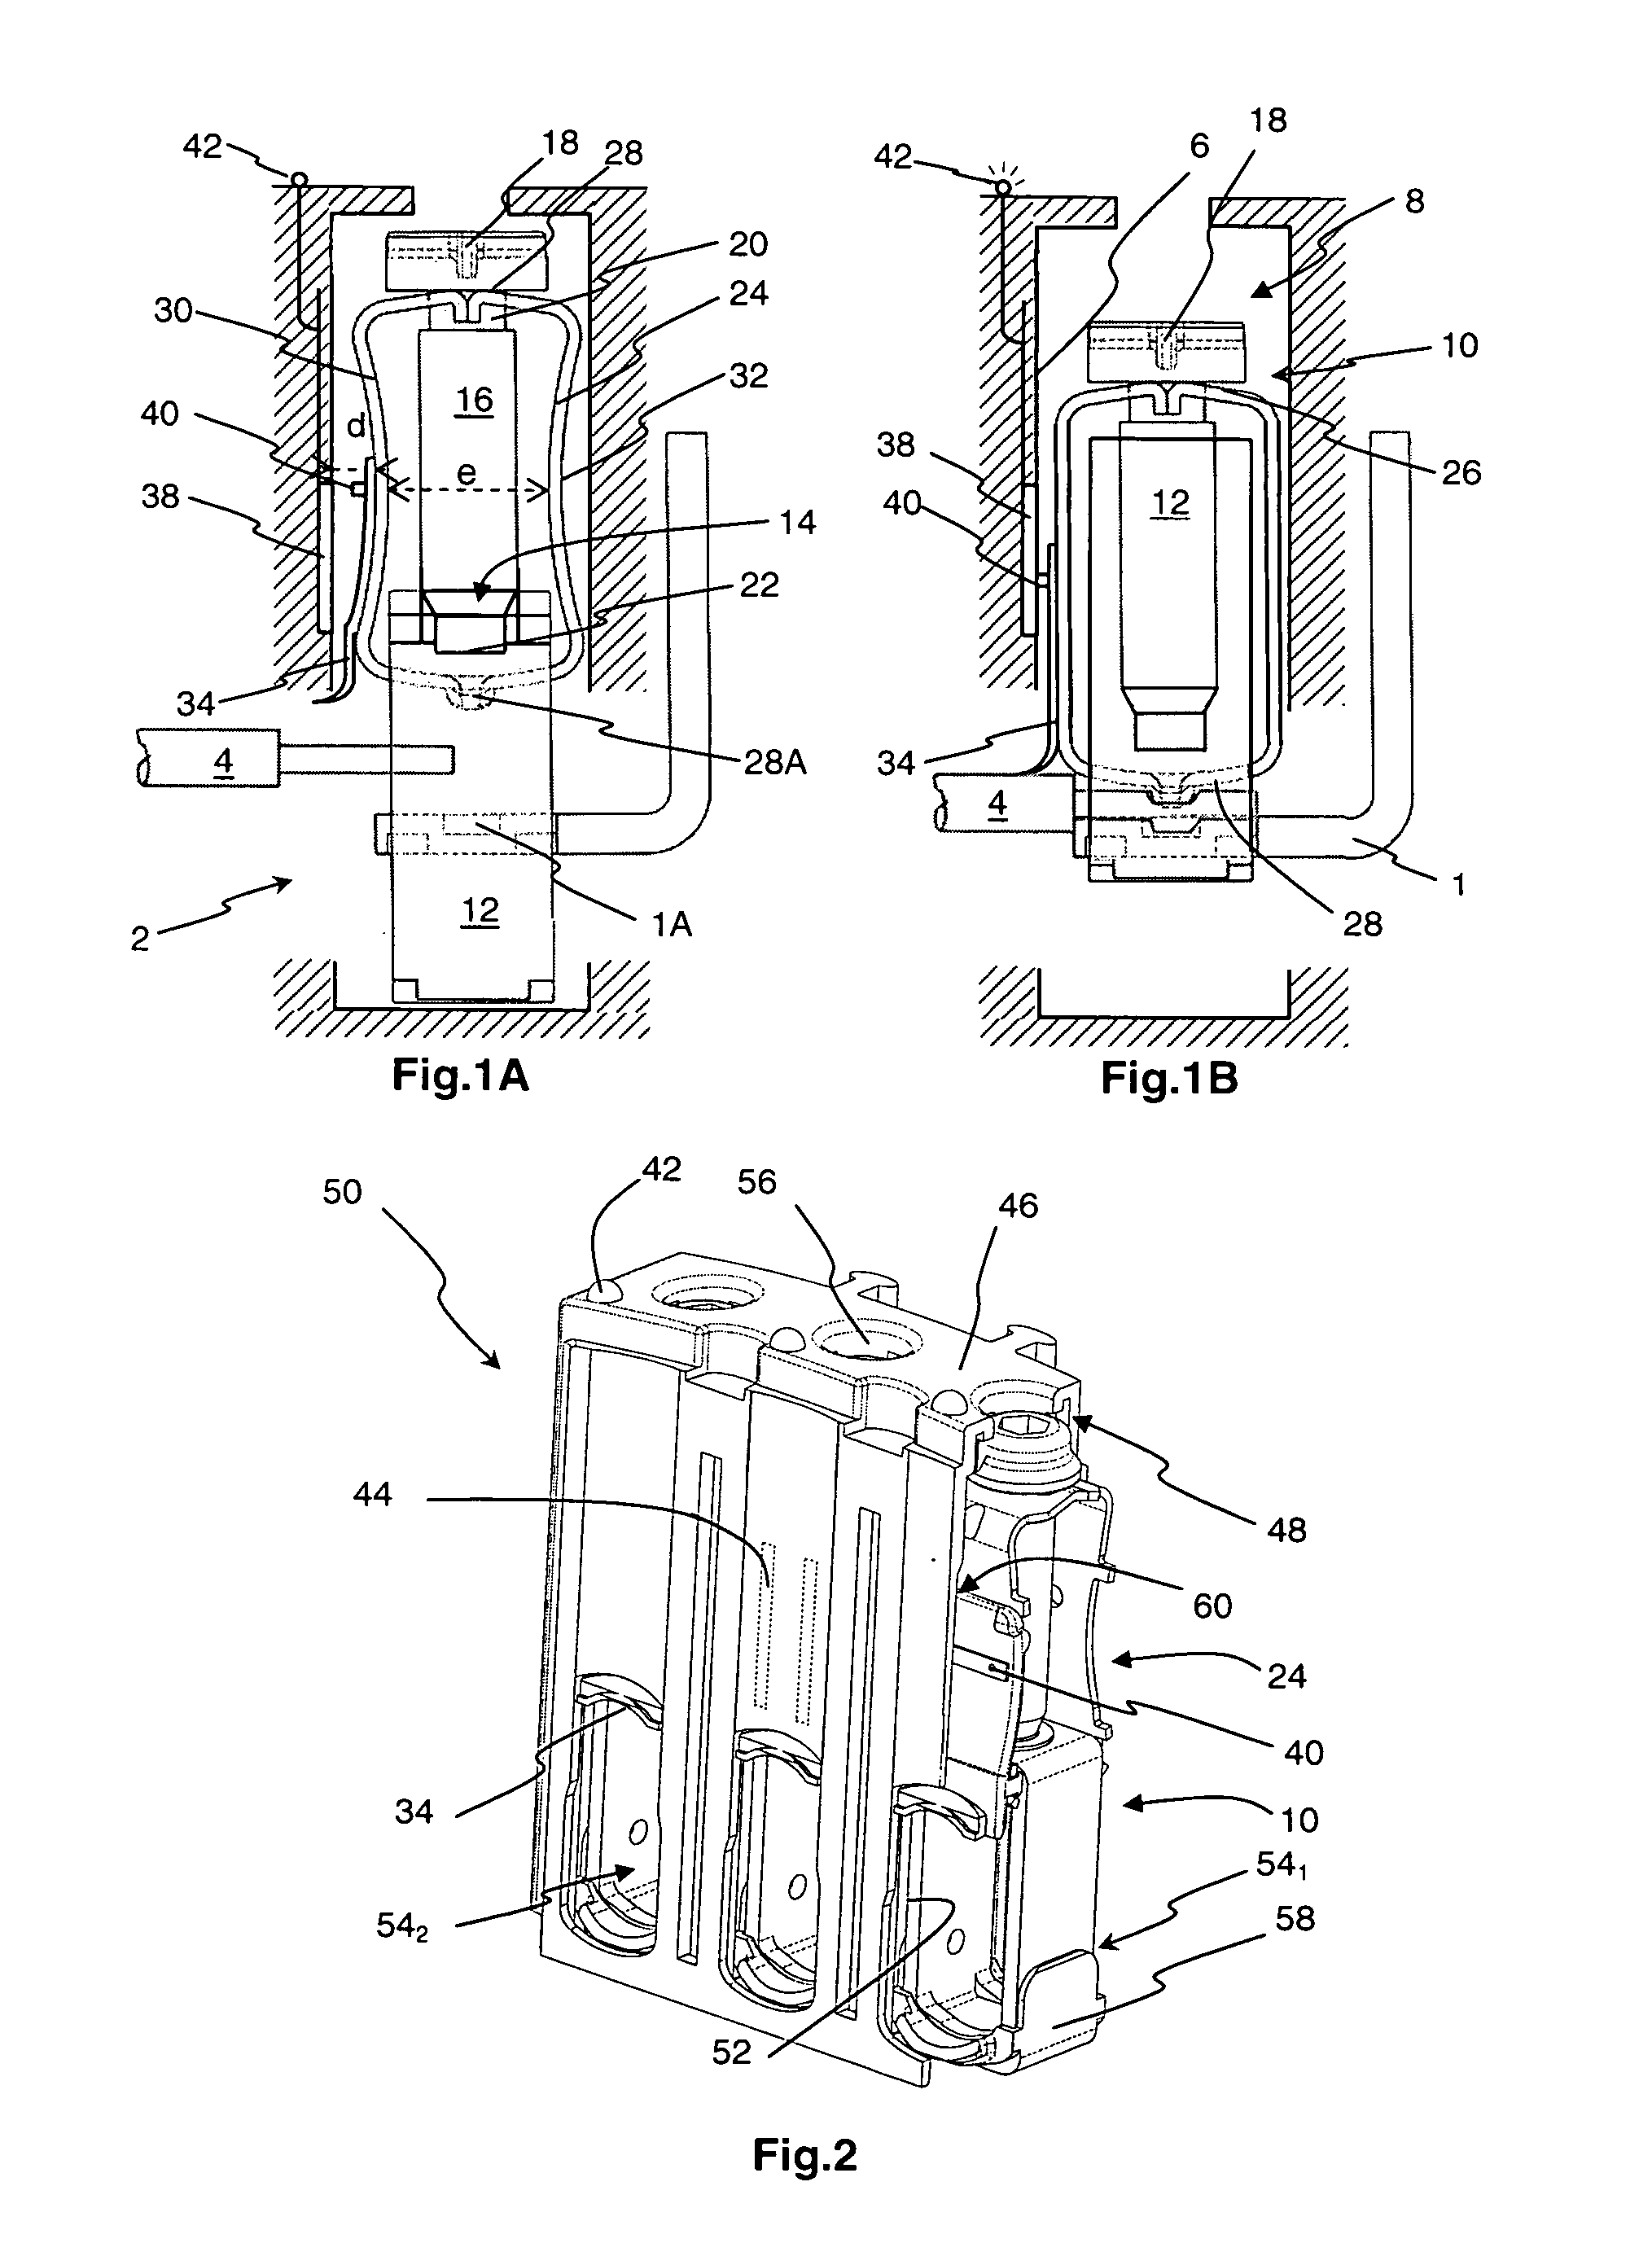 Connection system enabling the tightening torque of a screw terminal to be indicated